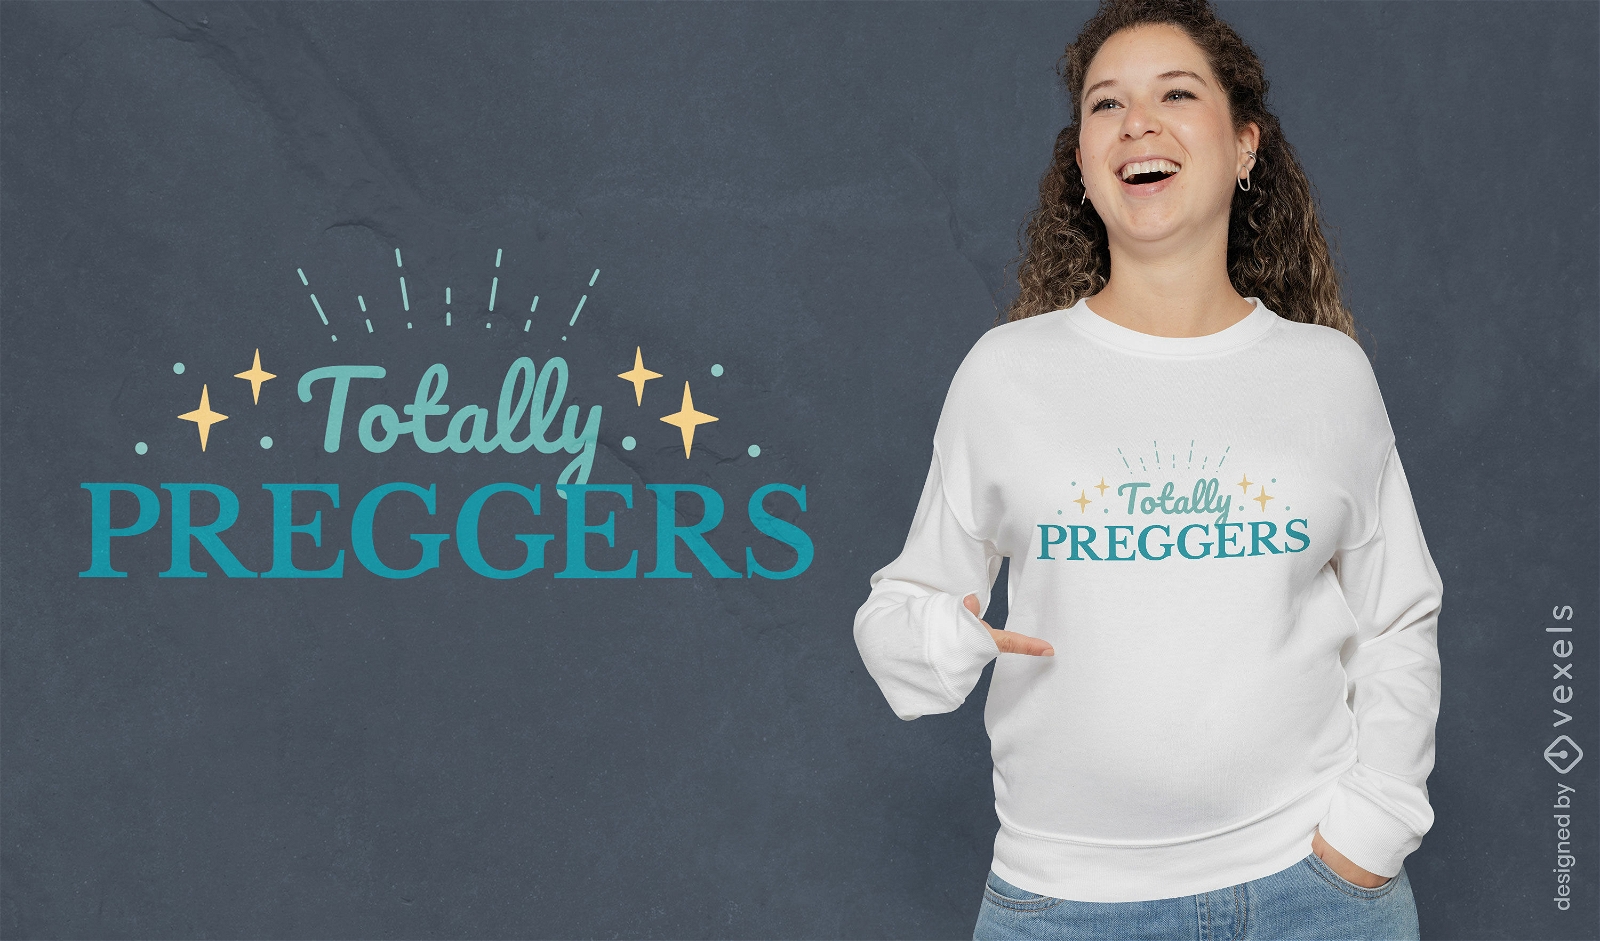 Expecting baby announcement t-shirt design